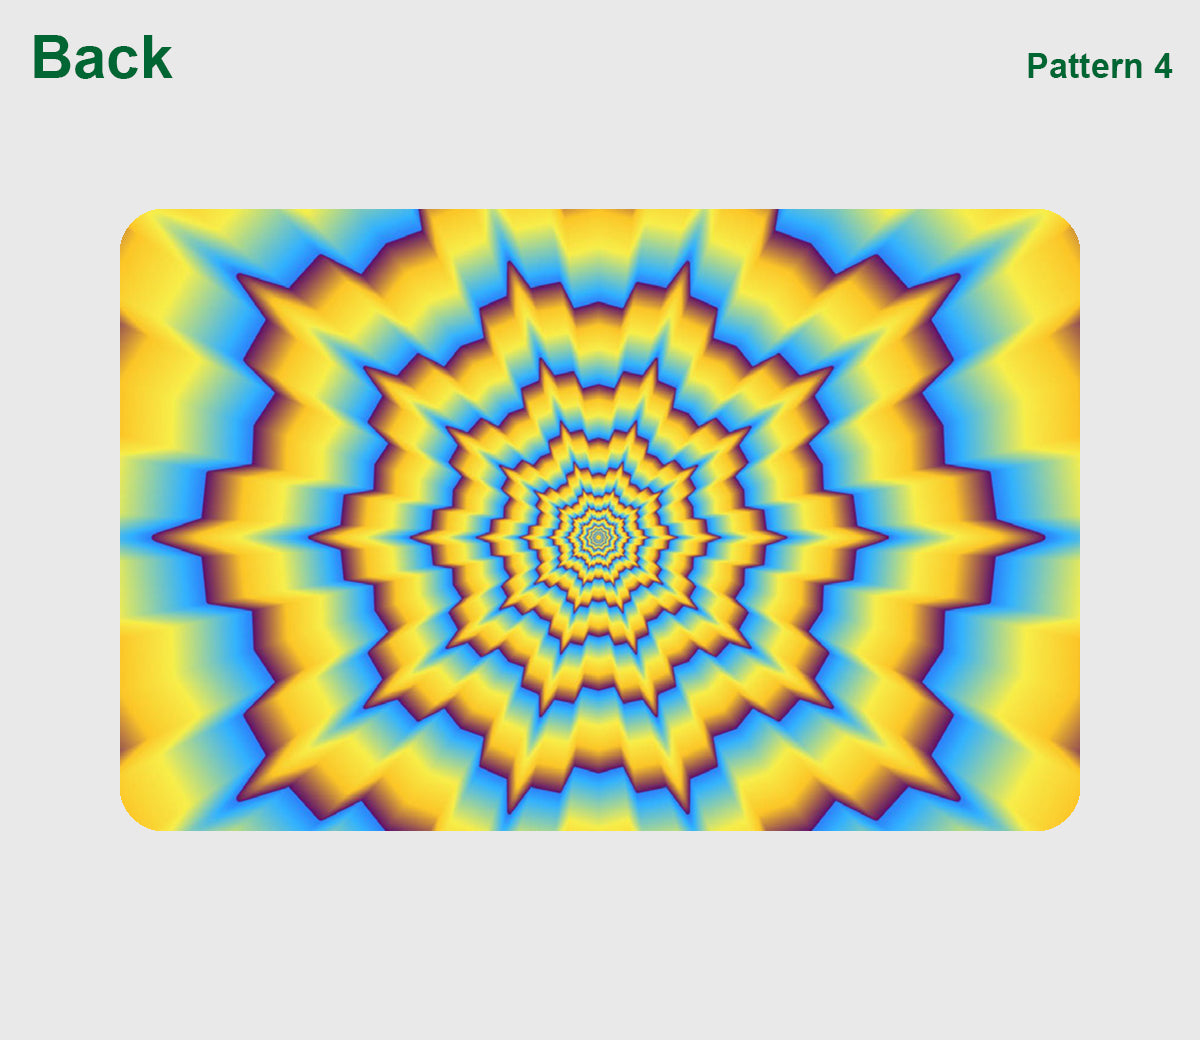 Psychedelic Business Cards - Back Side - Pattern 4